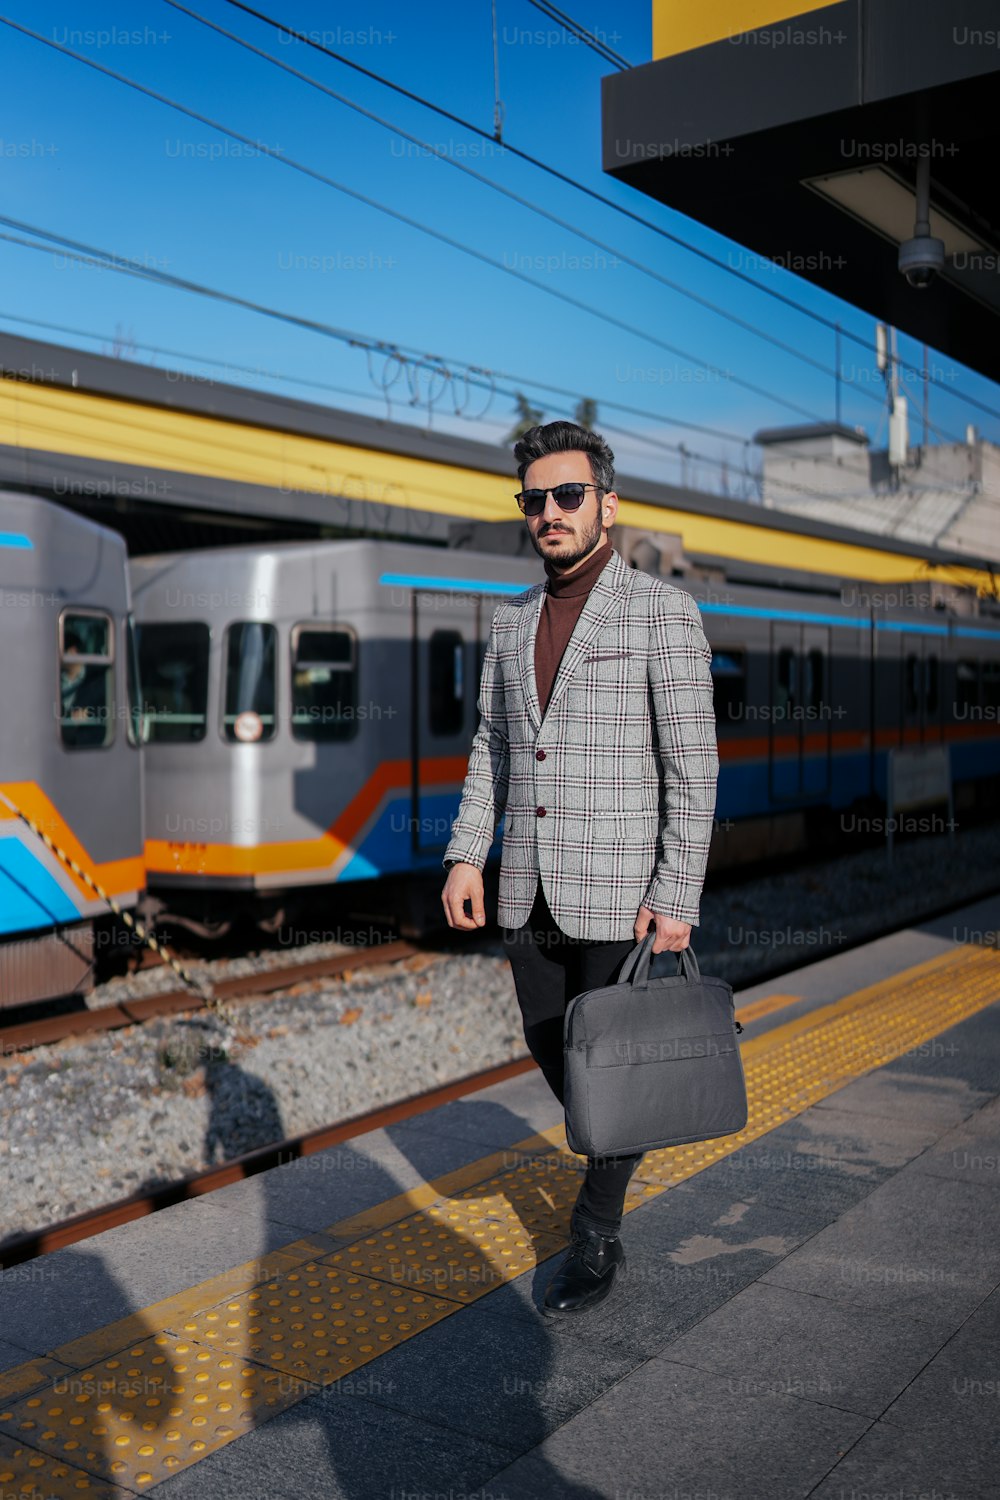 a man in a suit and sunglasses walking on a train platform